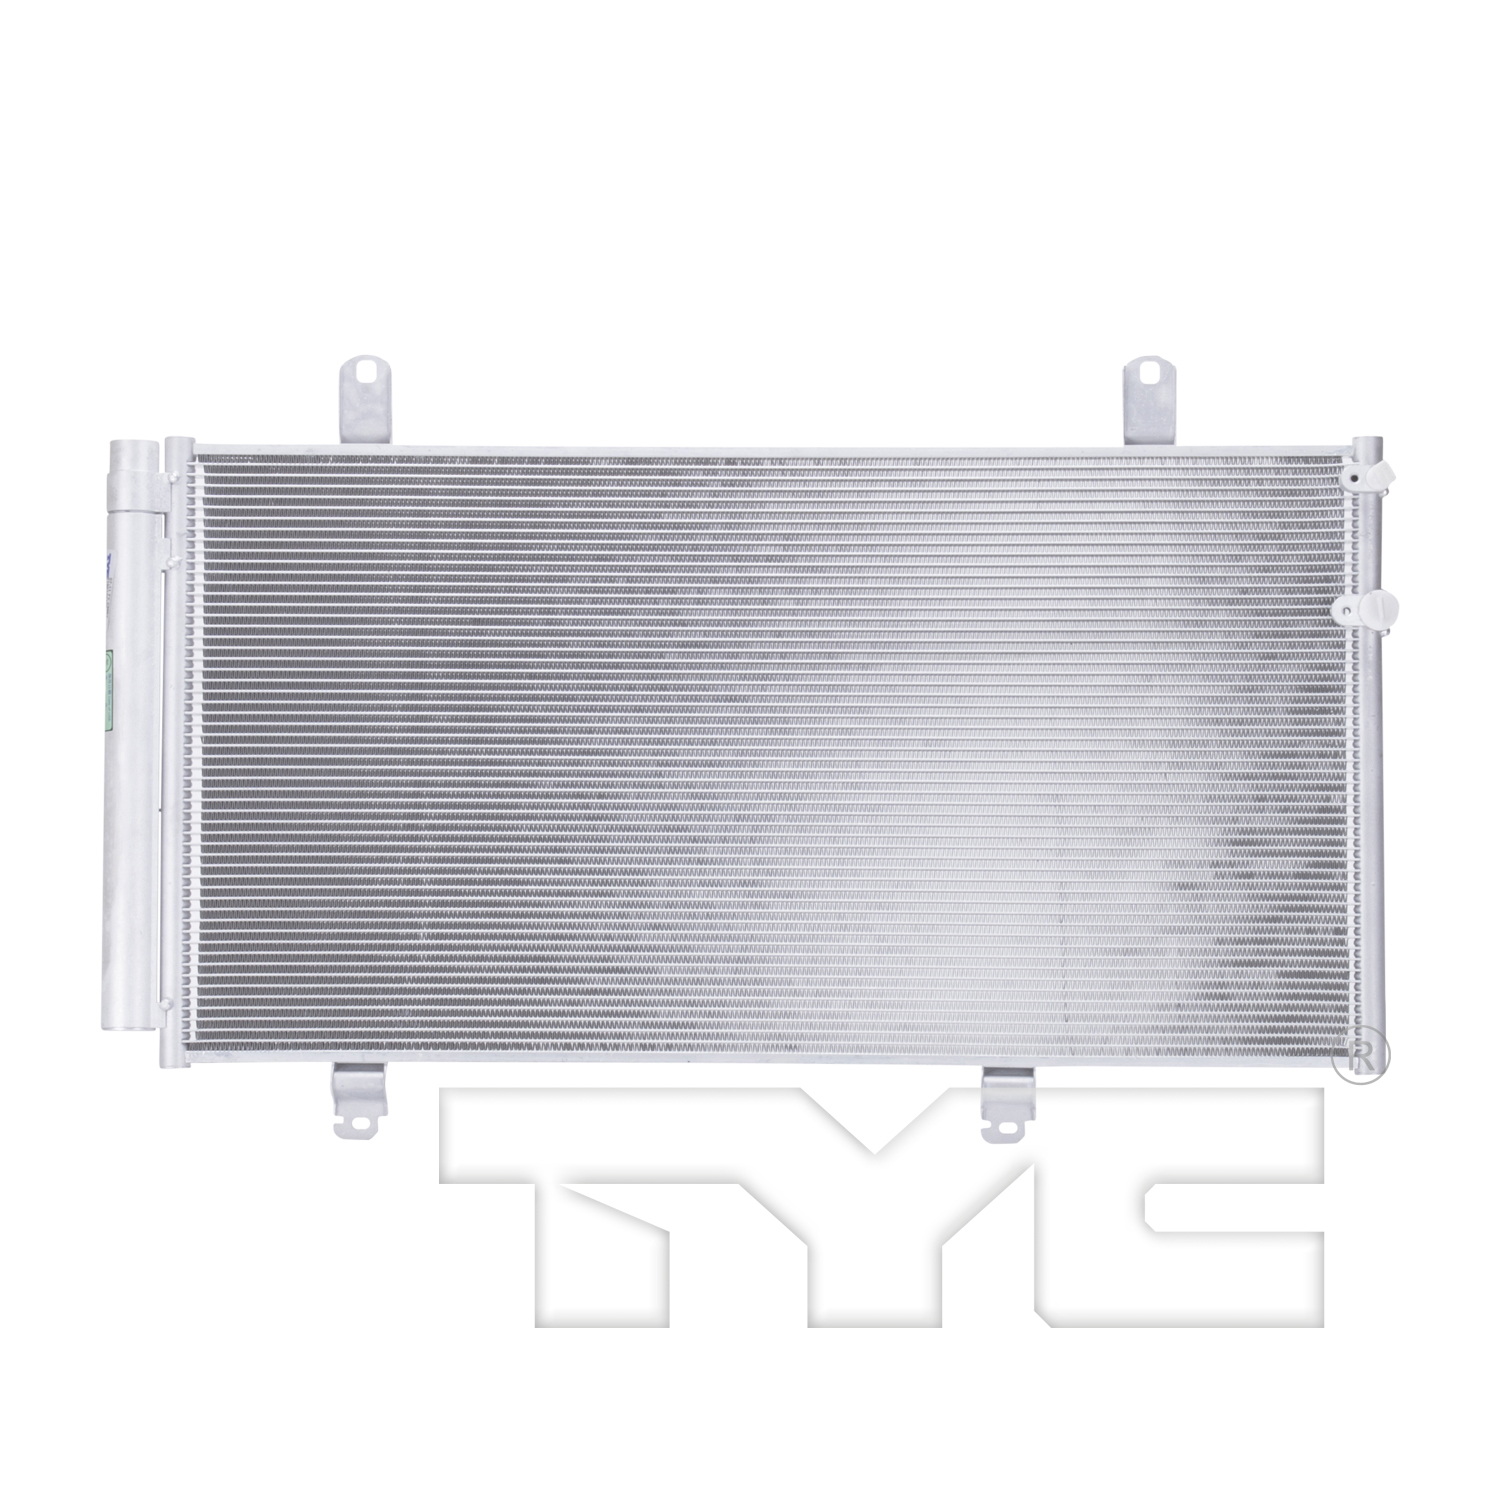 Aftermarket AC CONDENSERS for TOYOTA - CAMRY, CAMRY,07-11,Air conditioning condenser